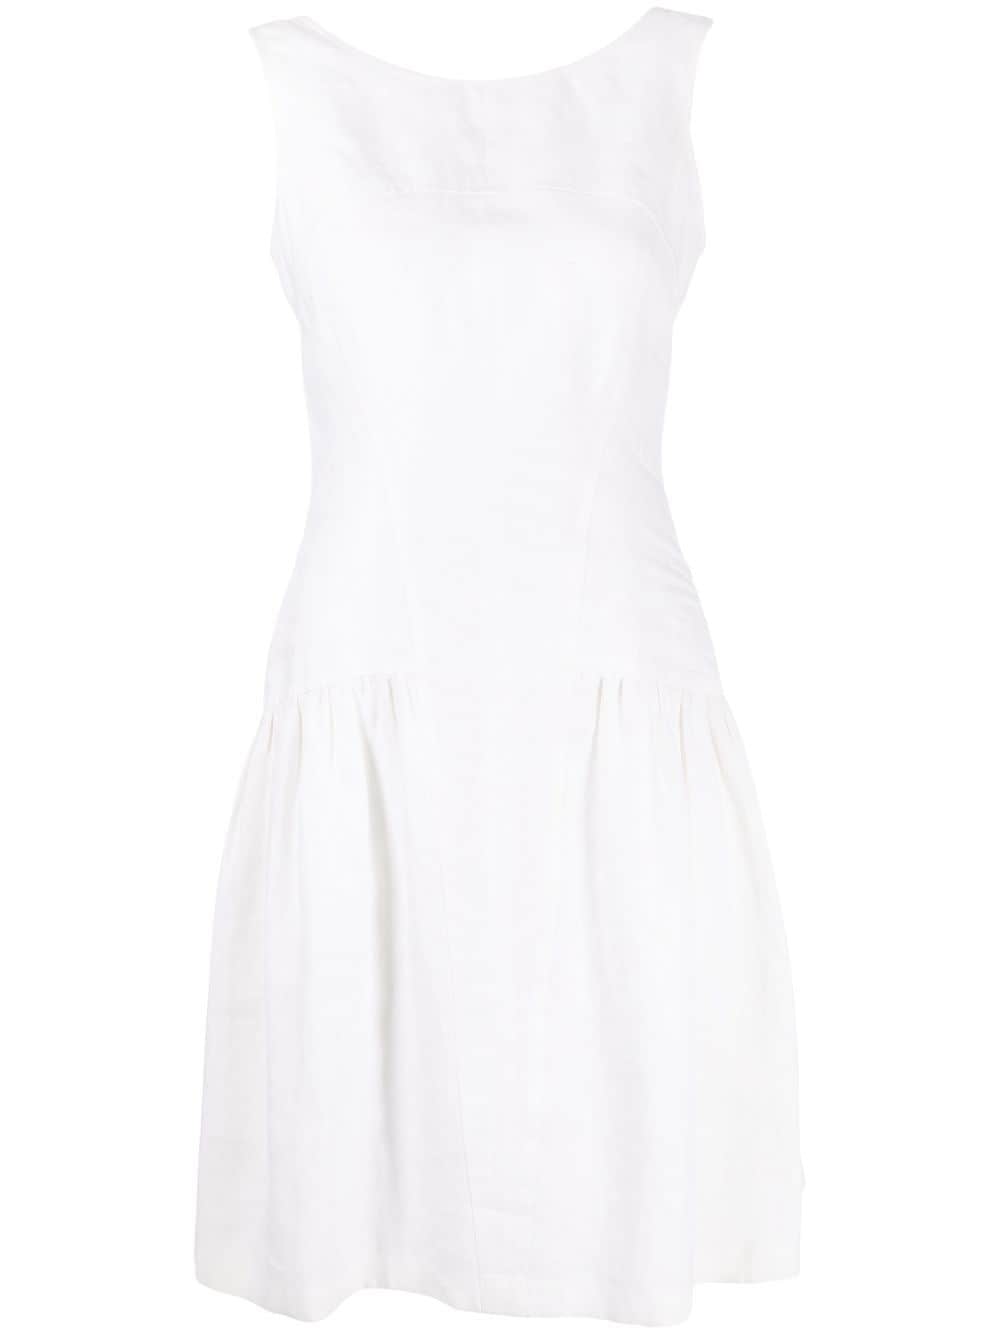 Chanel Pre-Owned 1996 gathered drop-waist dress - White